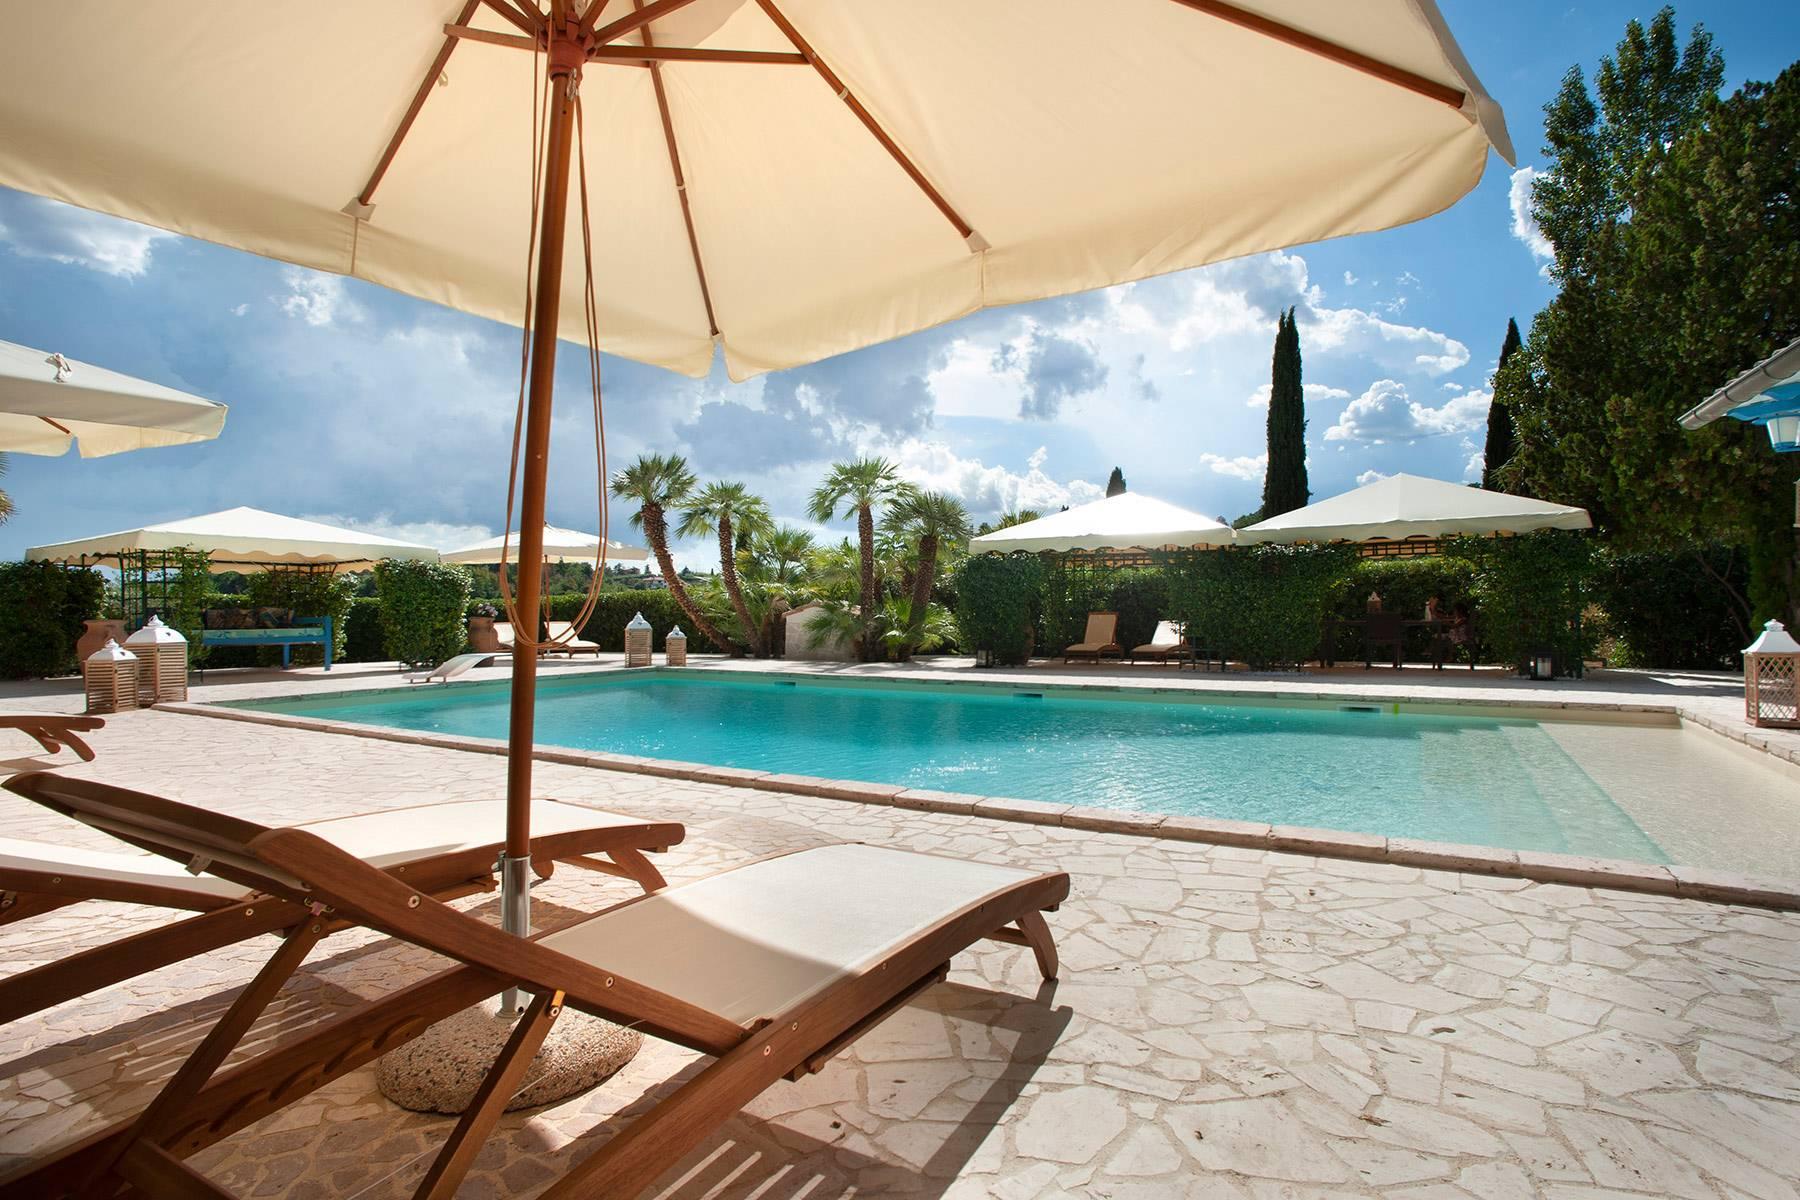 Villa Nayara - Lovely mansion with swimming pool 30 minutes from Rome - 9